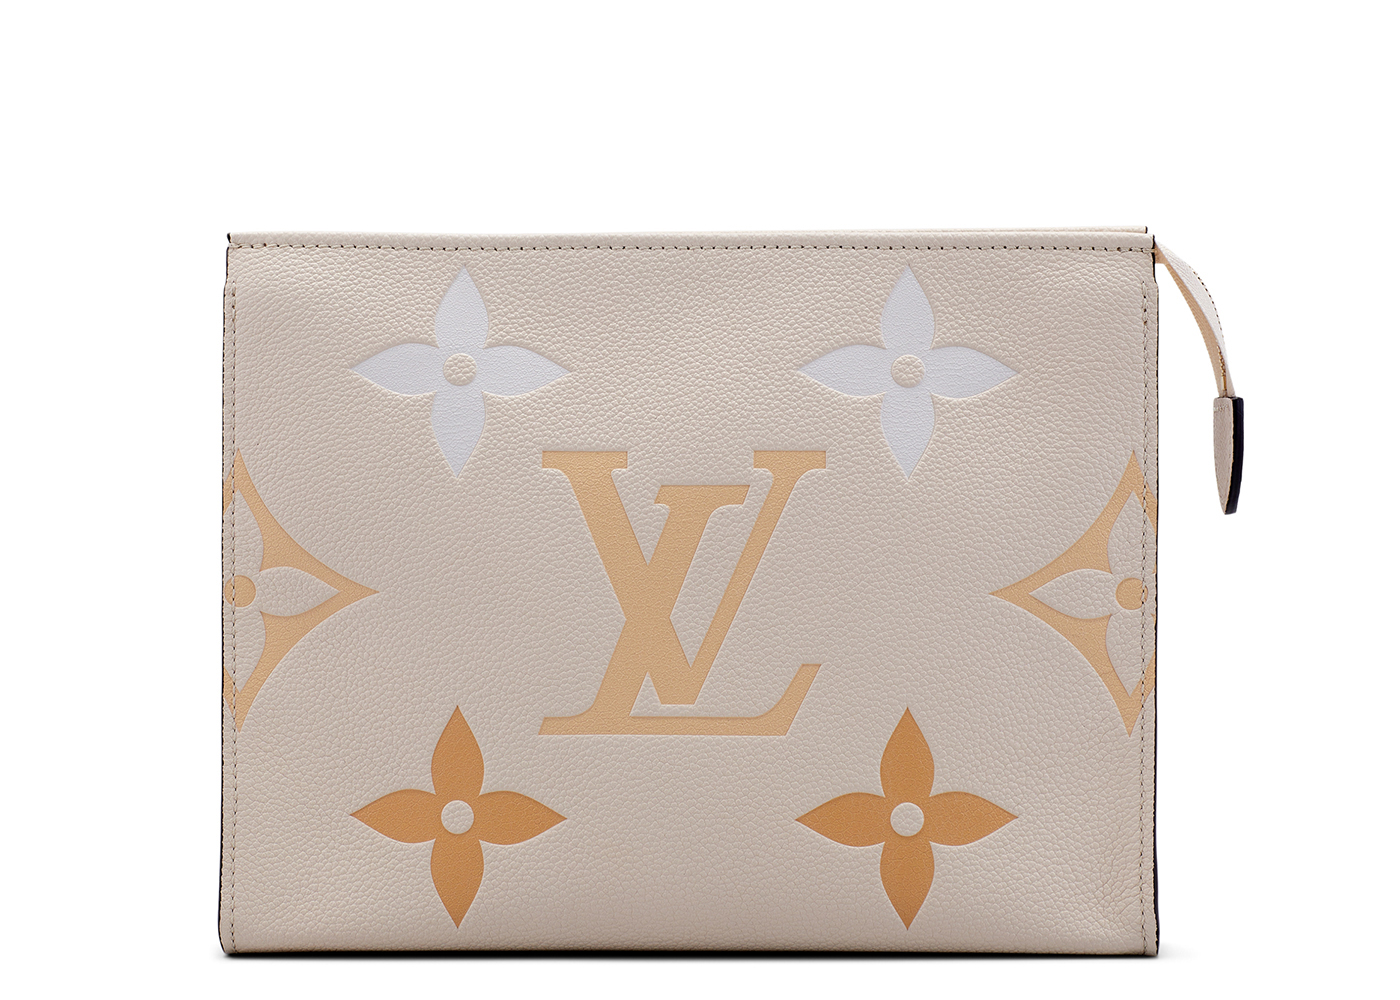 NEW LOUIS VUITTON TOILETRY POUCH 26 Large Monogram Clutch Bag  HOT GIFT  2022  eBay